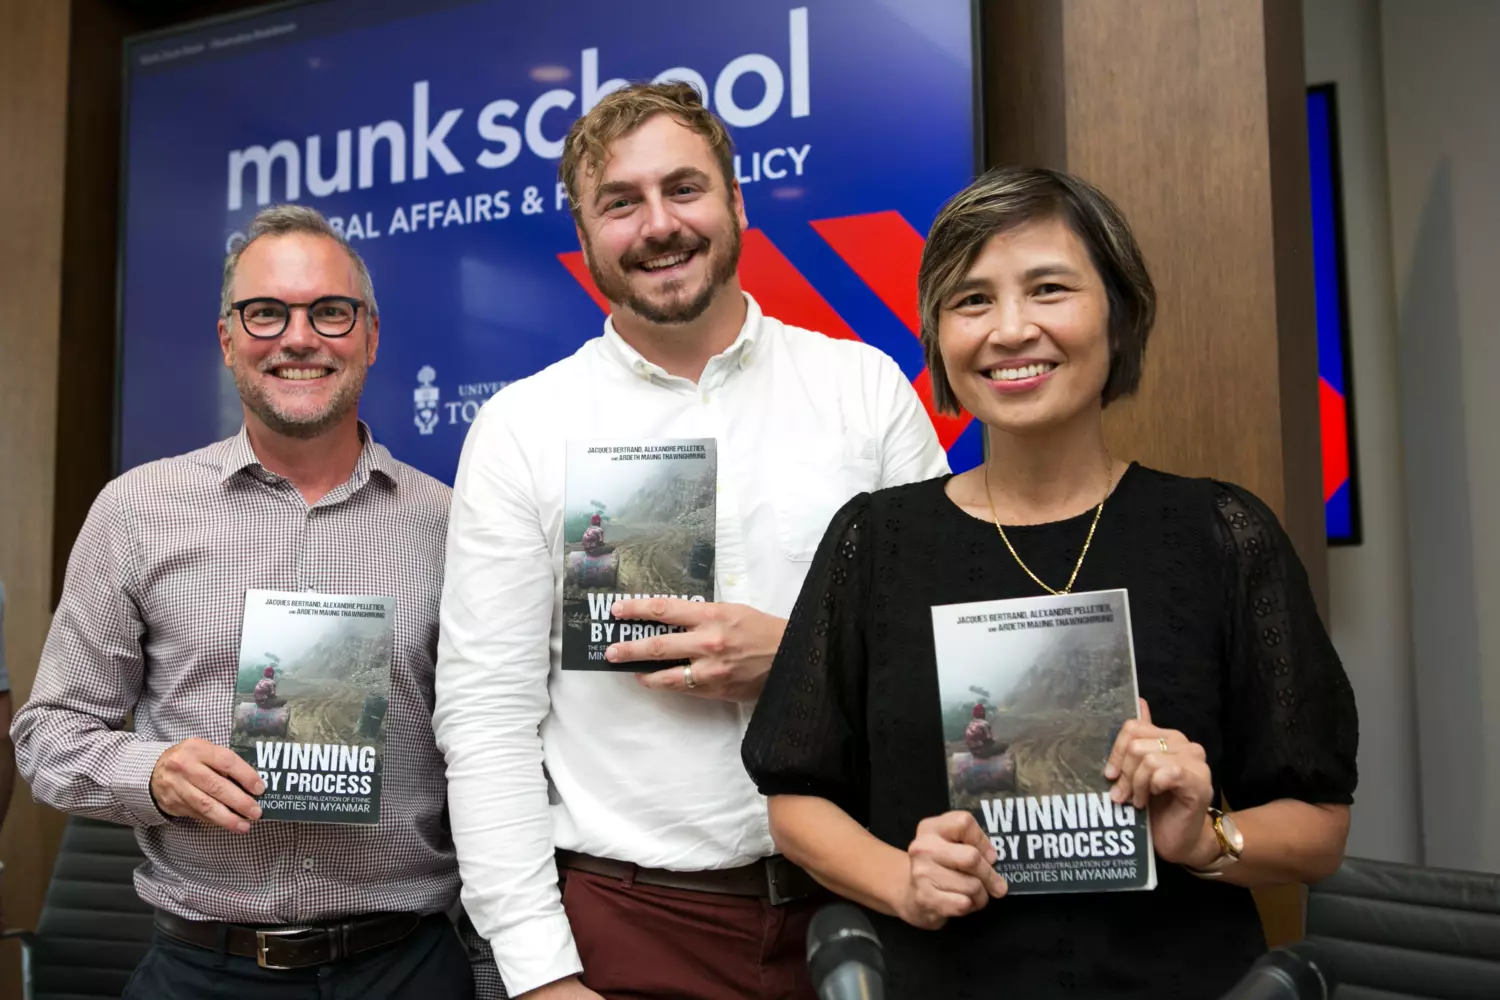 Co-authors of the Winning by Process on the day of the book launch at the Munk School